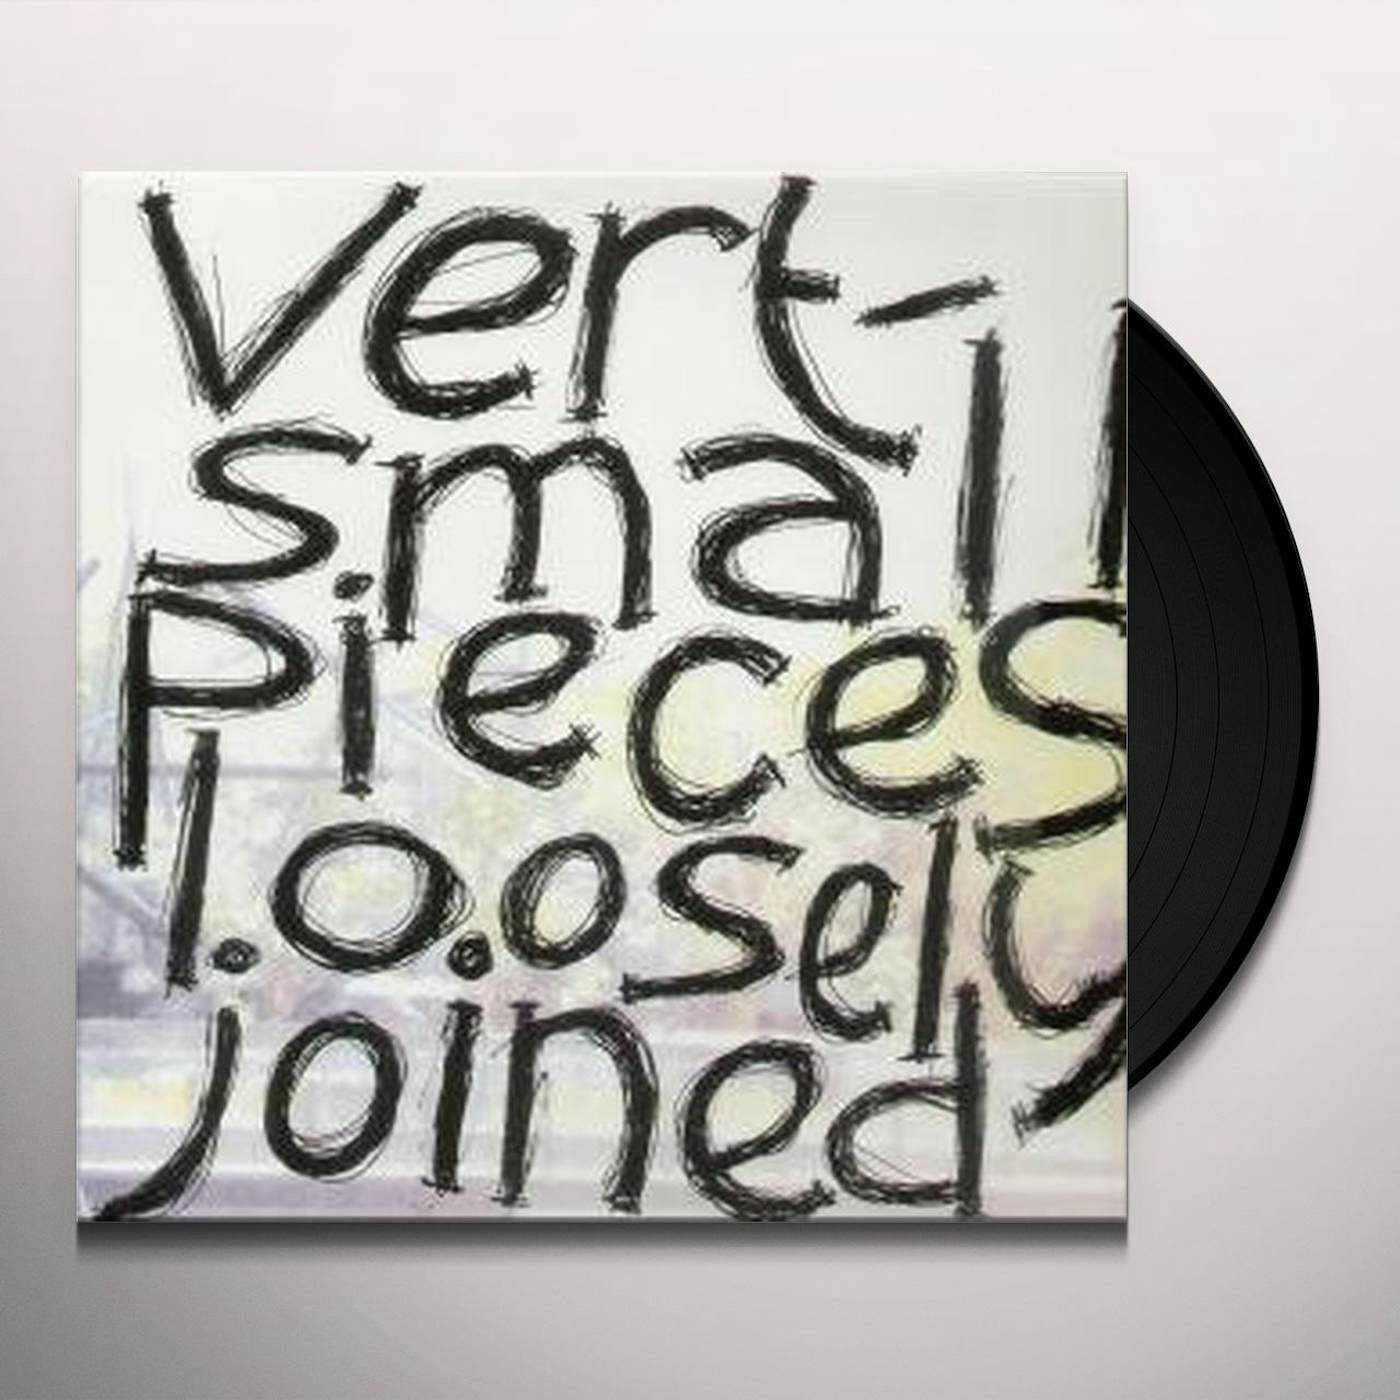 Vert SMALL PIECES LOOSELY JOINED Vinyl Record